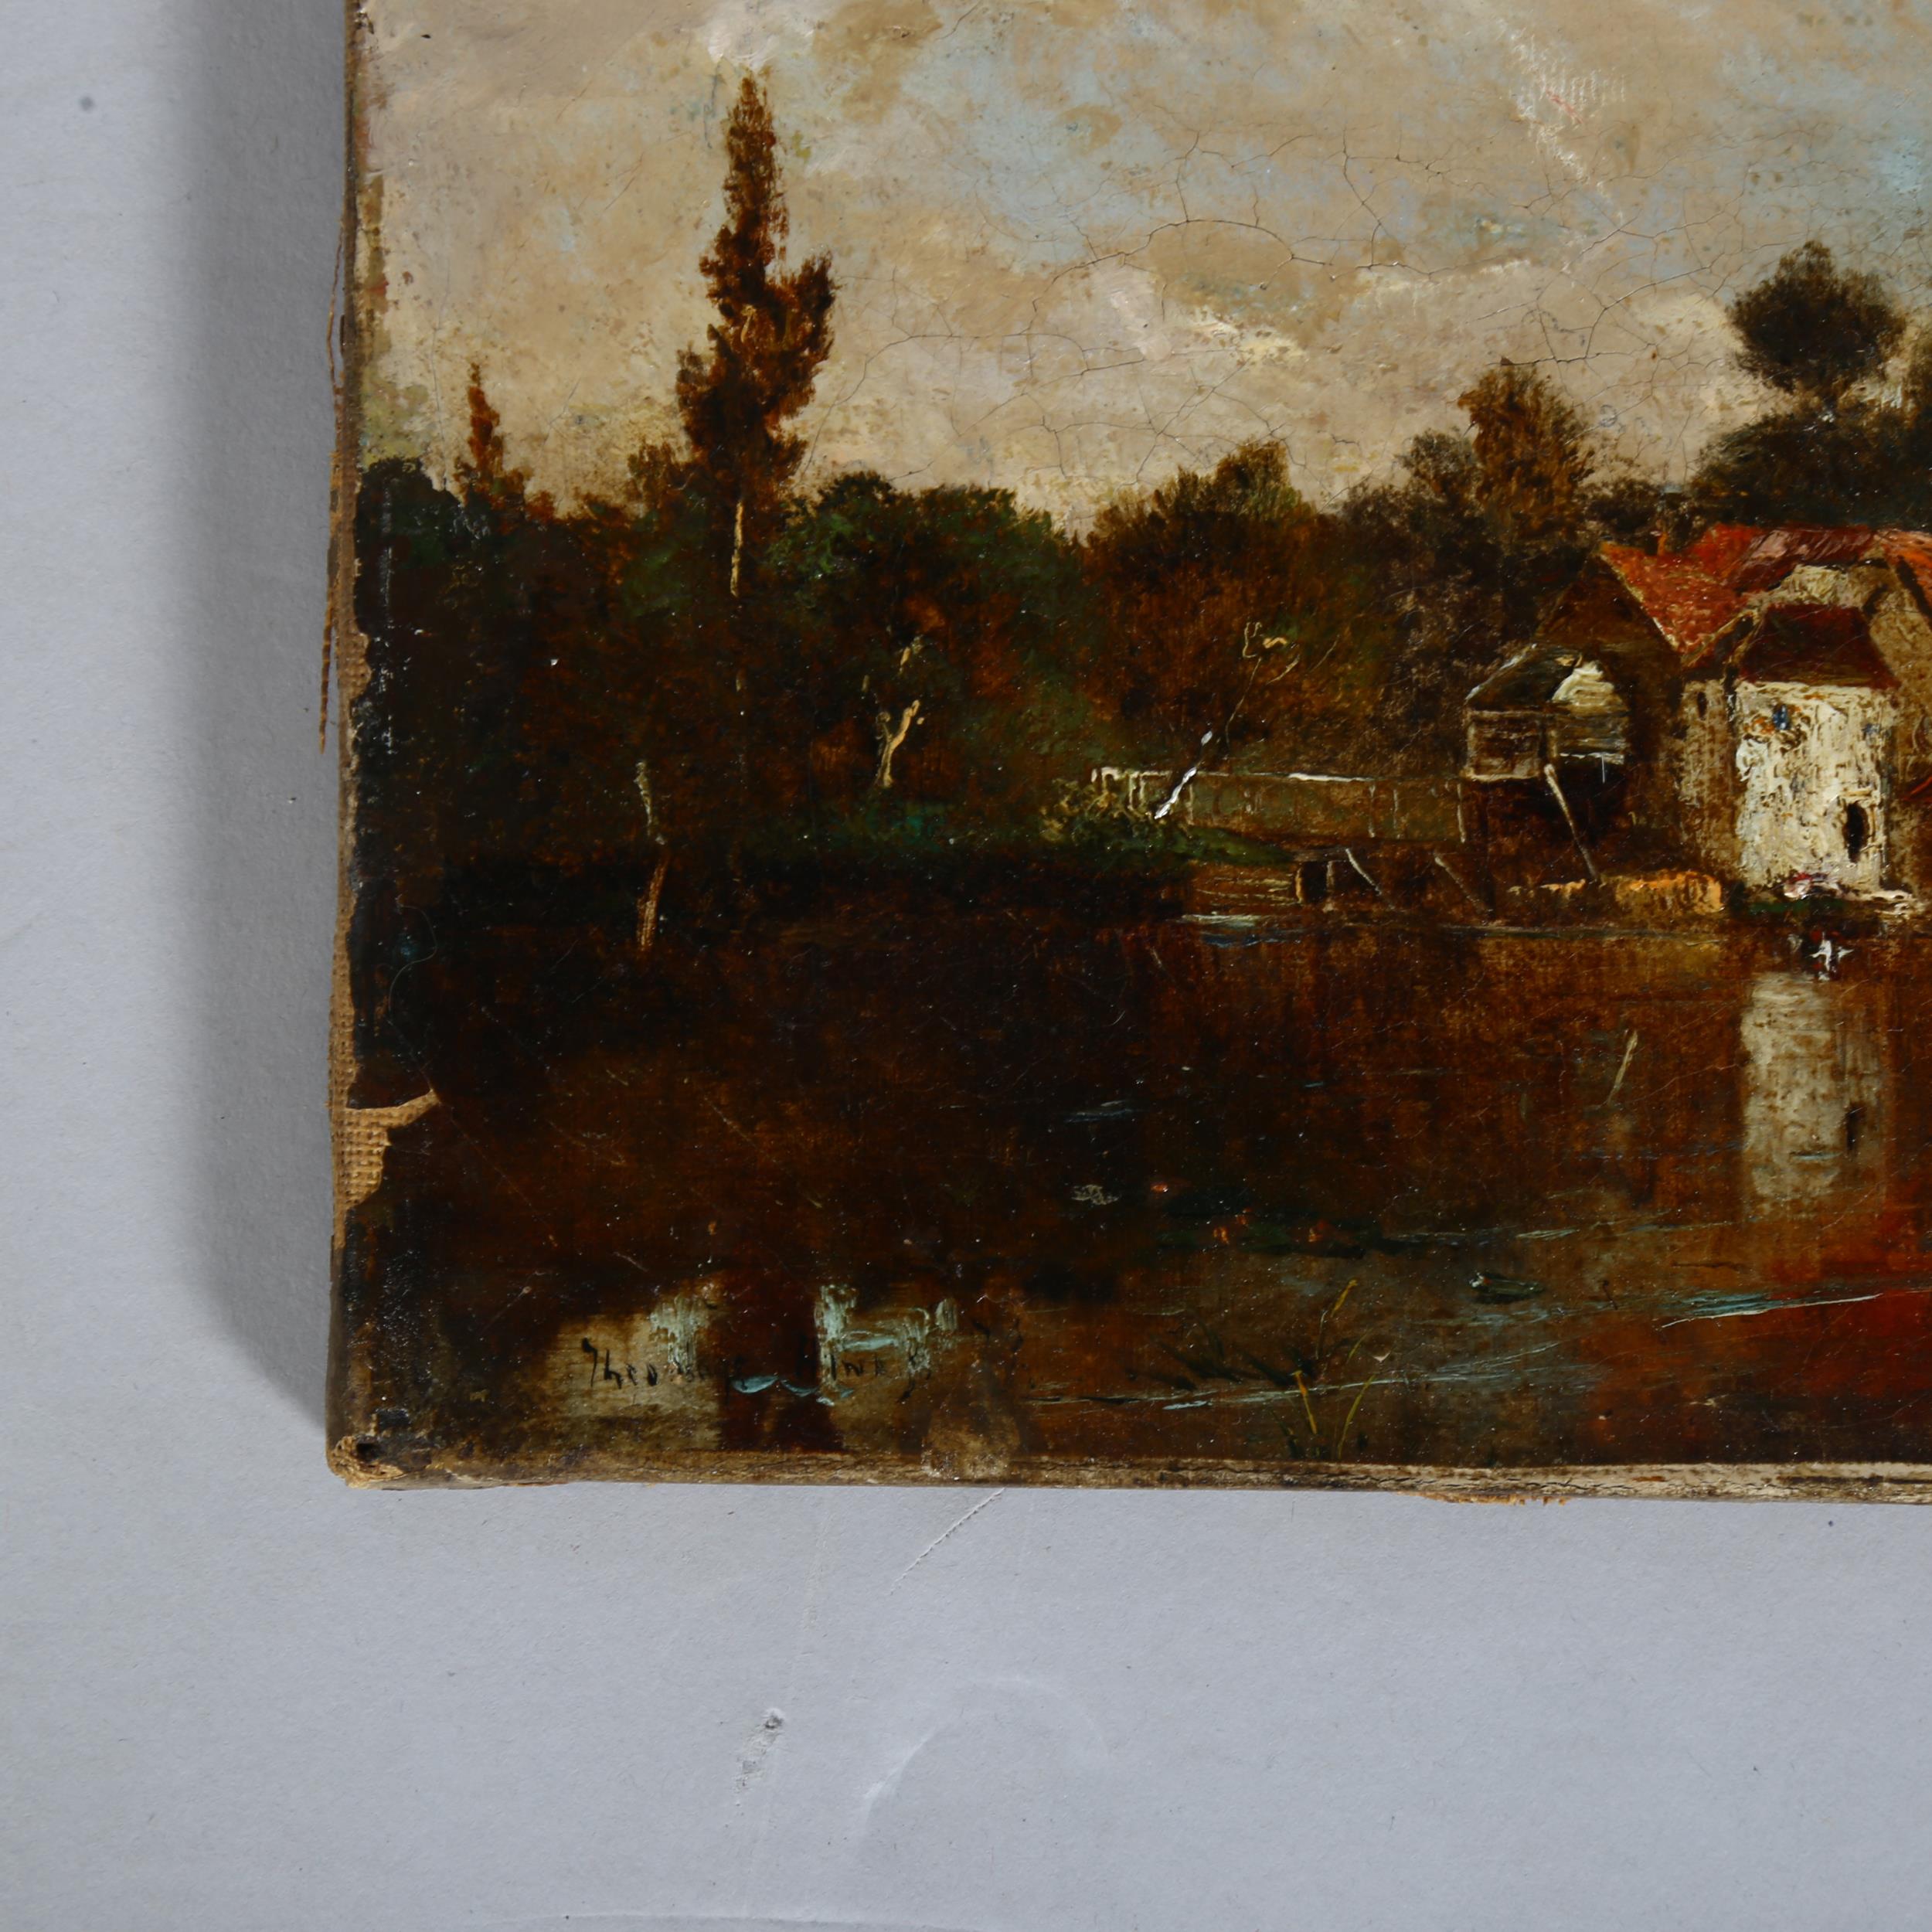 Theodore Hines (1860-1889), study of a mill 1879, oil on canvas, signed, 23cm x 15cm, unframed - Image 3 of 4